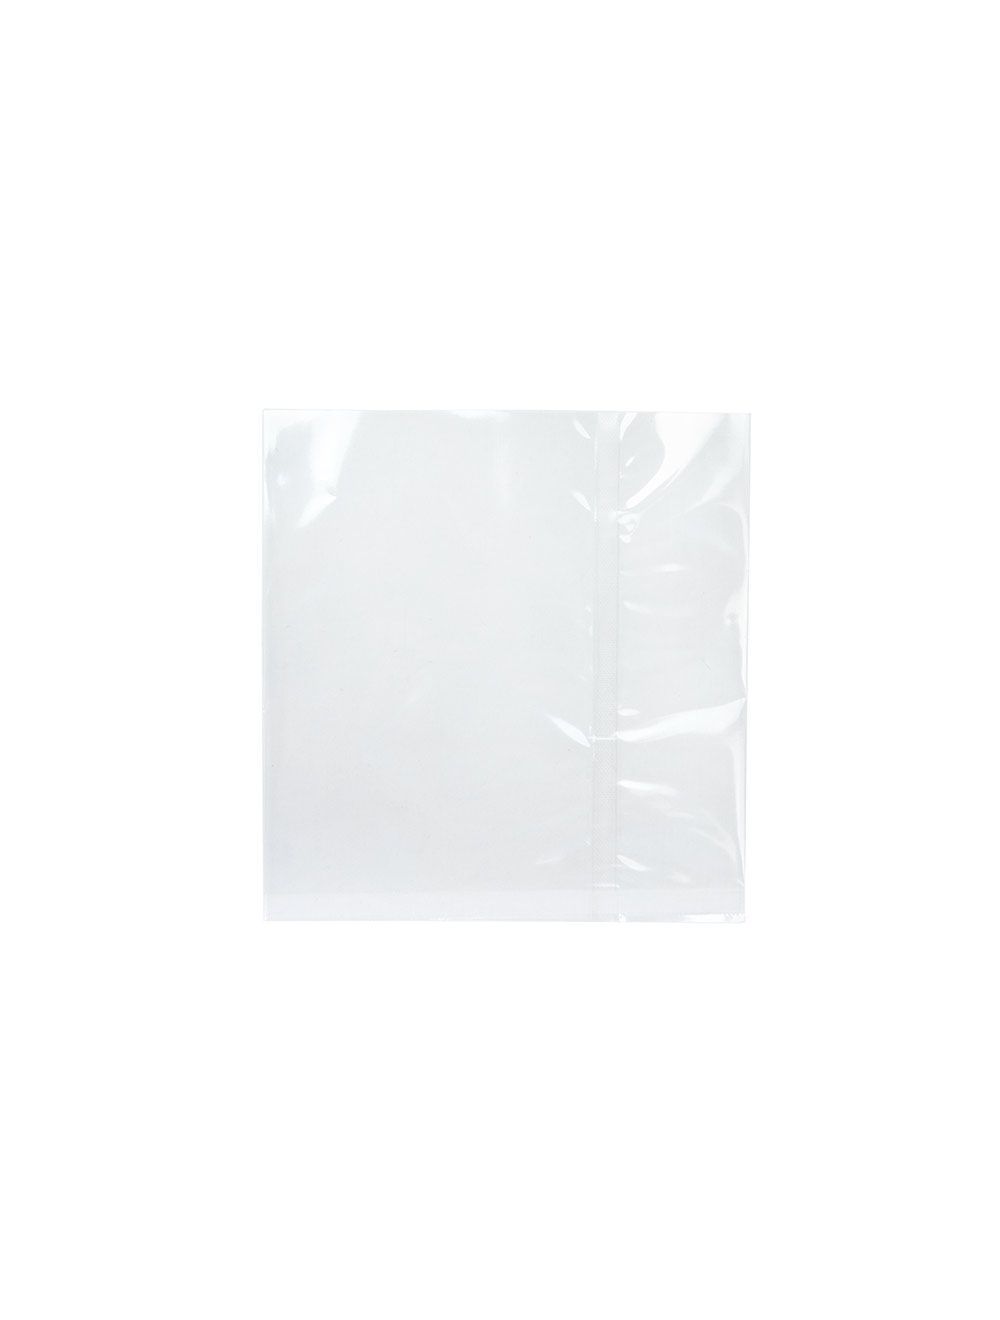 https://clearbags.ca/media/catalog/product/cache/f17b606b45395d85597174d7065119be/S/F/SFB44M-flat-heat-seal-bag-1.jpg